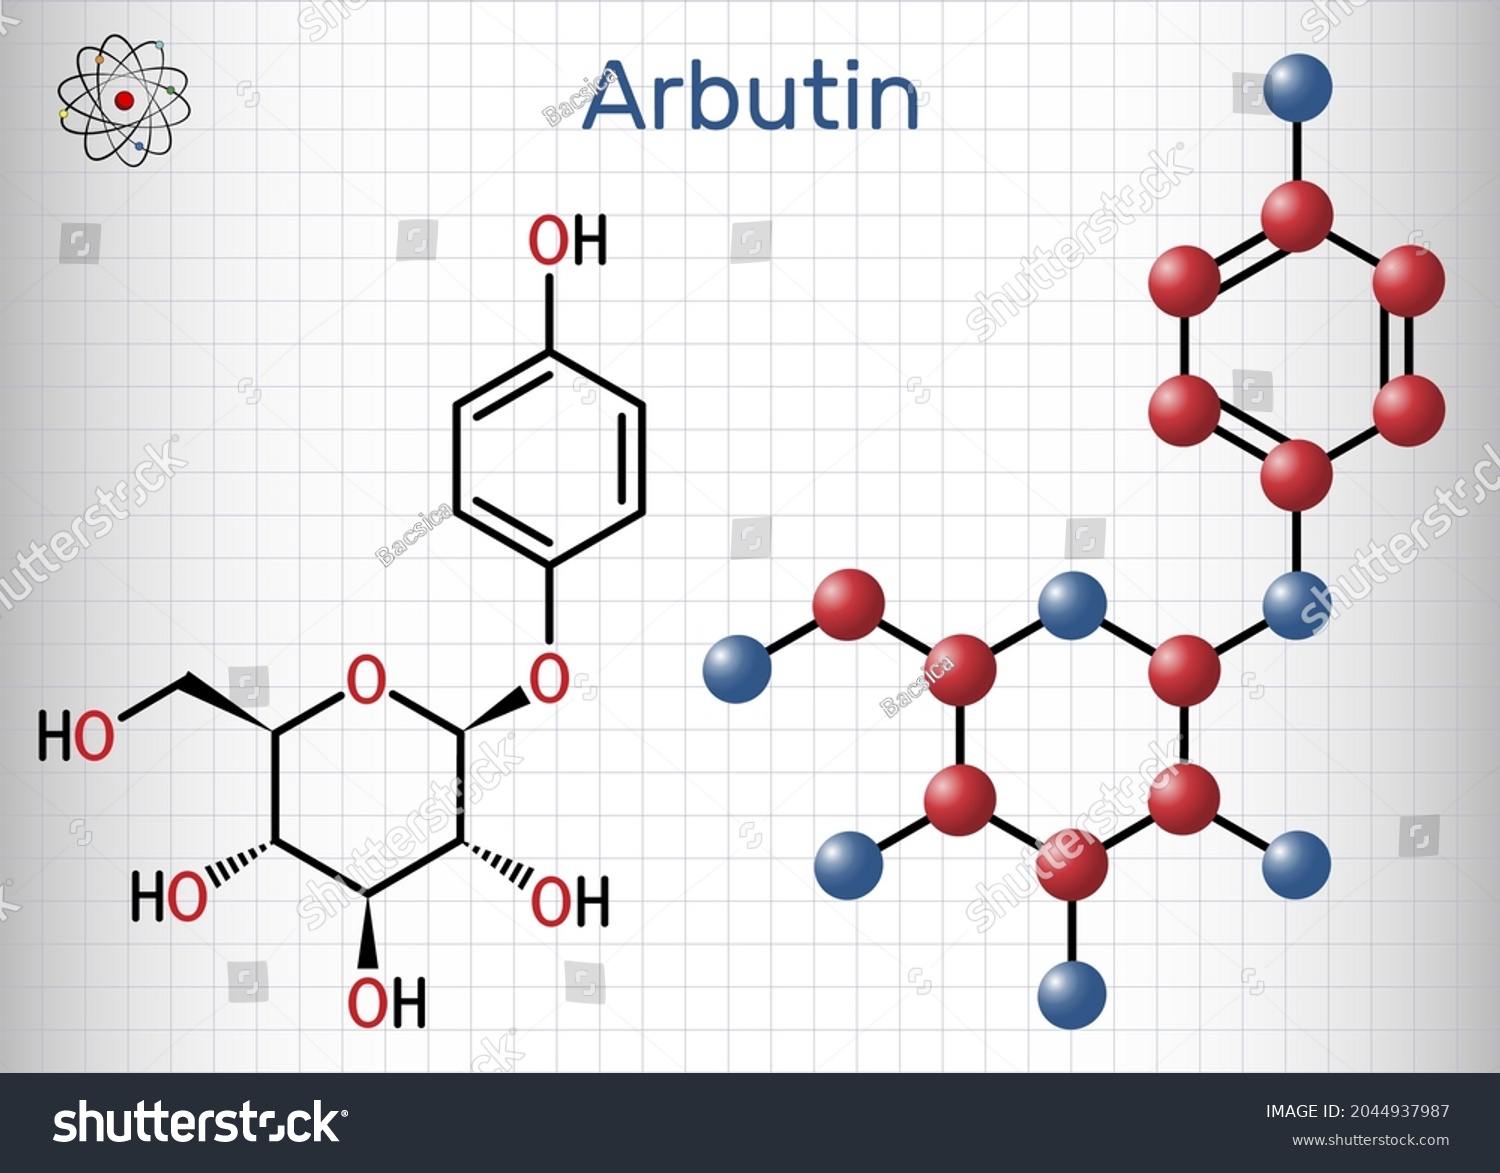 SVG of Arbutin, ursin, arbutoside, glycoside molecule. It is found in plants, preparations from them are used in medicine for diseases of bladder as antiseptic. Sheet of paper in a cage. Vector illustration svg